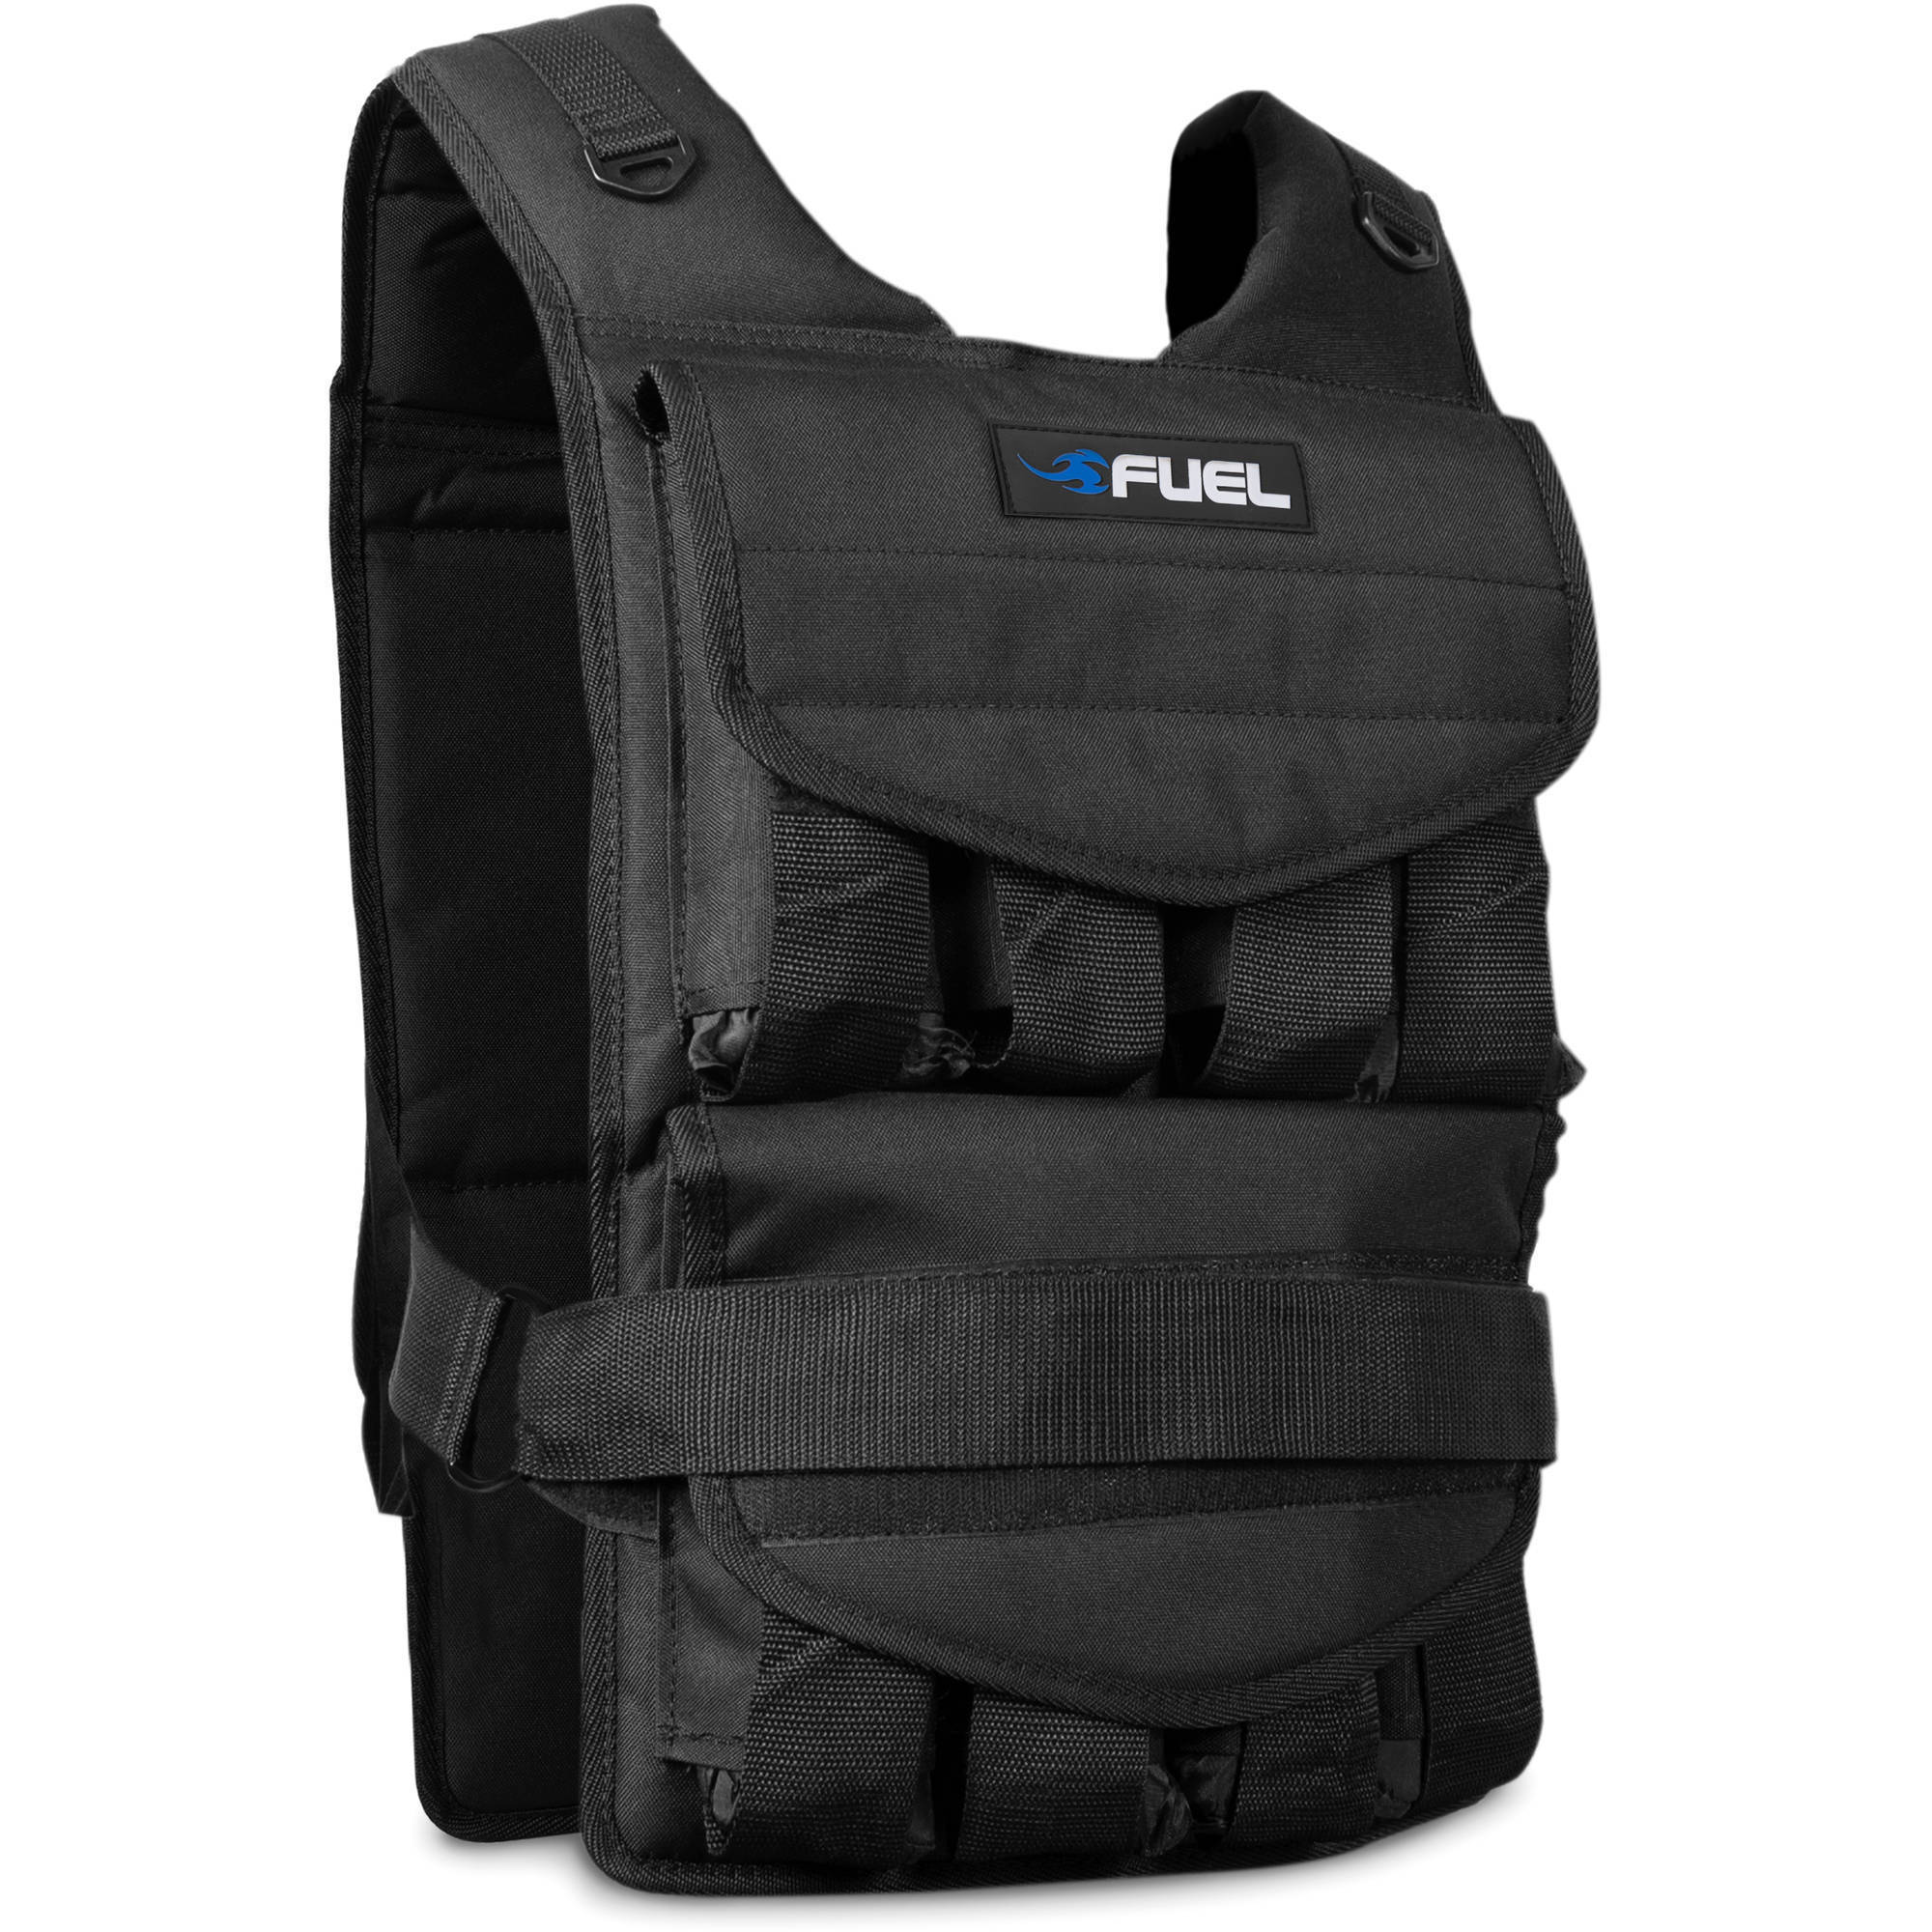 Fuel Pureformance Adjustable Weighted Fitness Vest, 40 Lb. - image 1 of 4